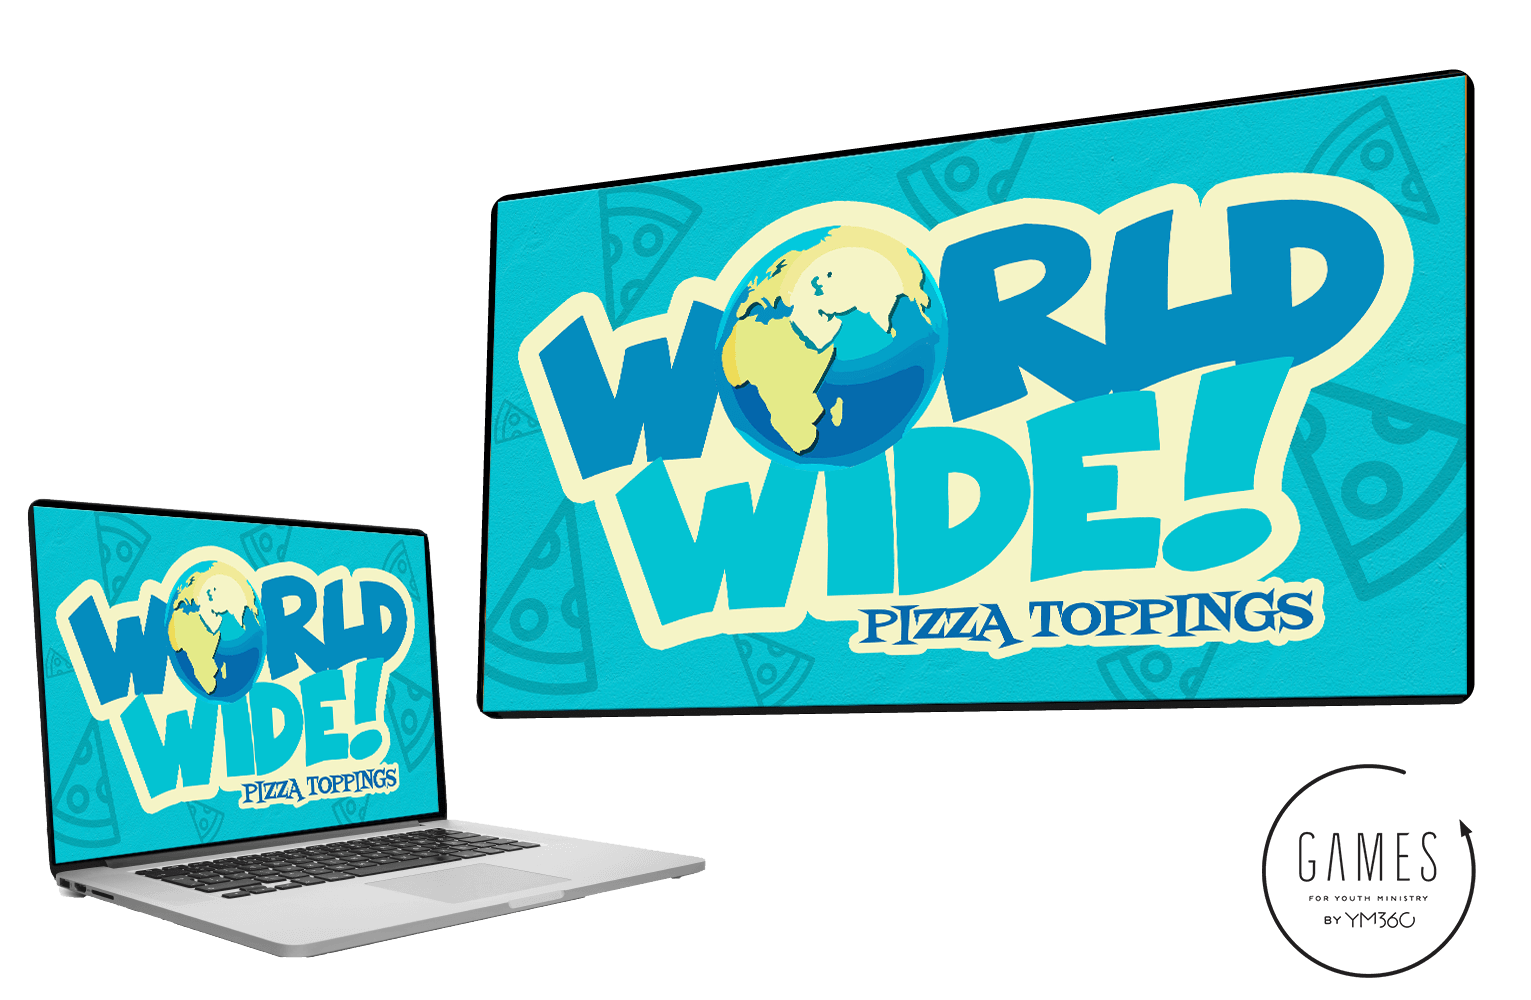 WorldWide: Pizza Toppings